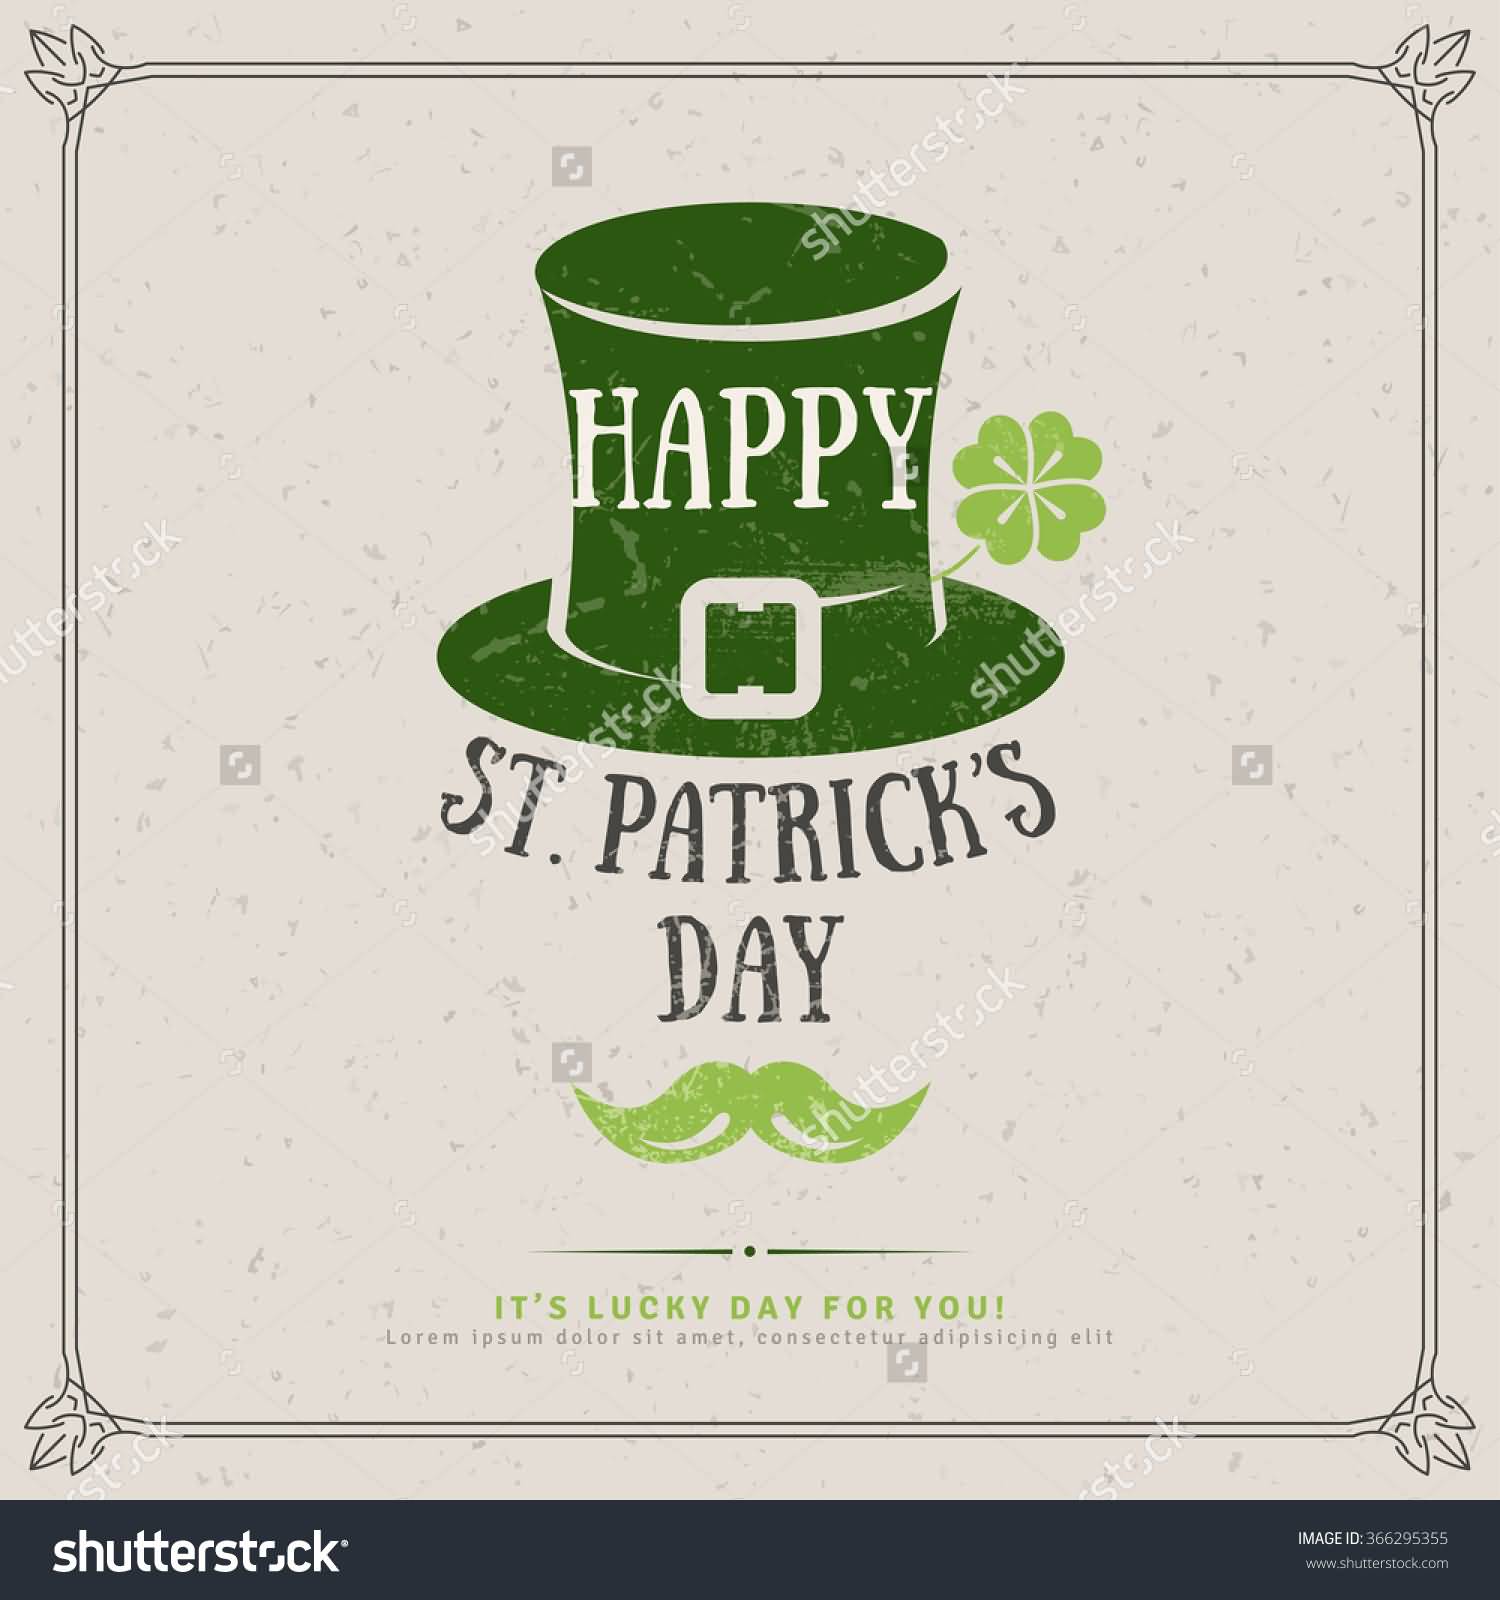 Happy Saint Patrick’s Day It’s Lucky Day For You Greeting Card